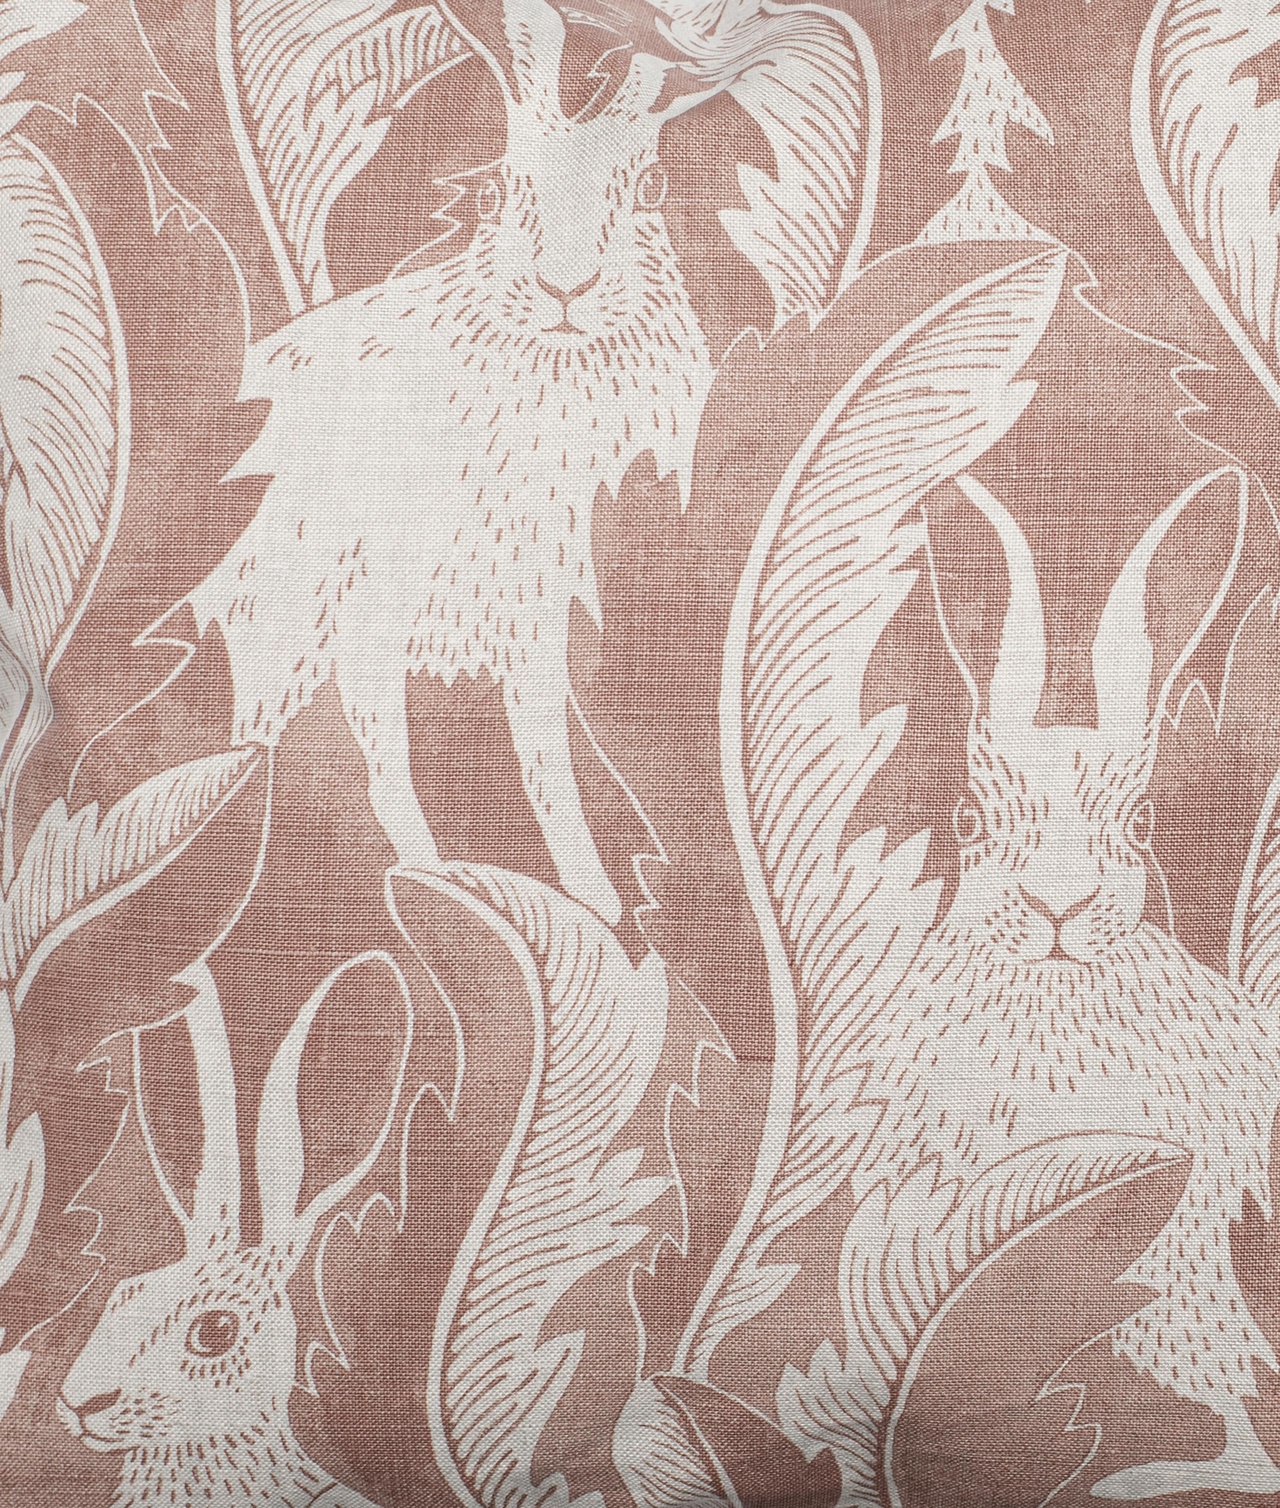 Linen fabric "Hares in hiding"